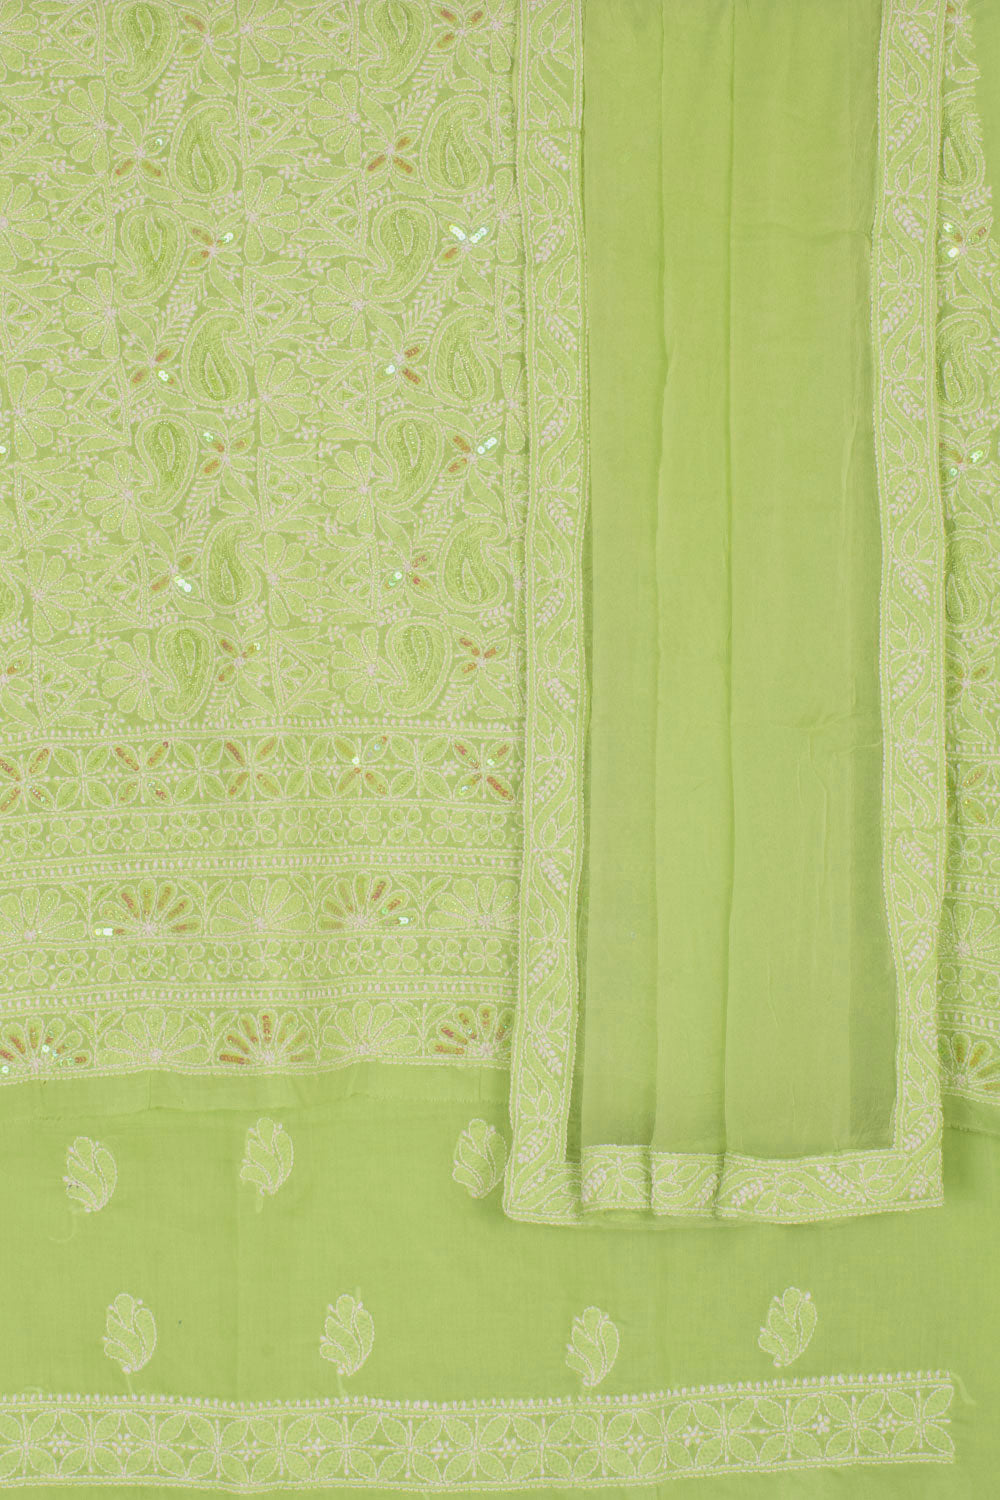 Hand Embroidered Chikankari Cotton 3-Piece Salwar Suit Material with Sequin, Bead Work and Chiffon Dupatta